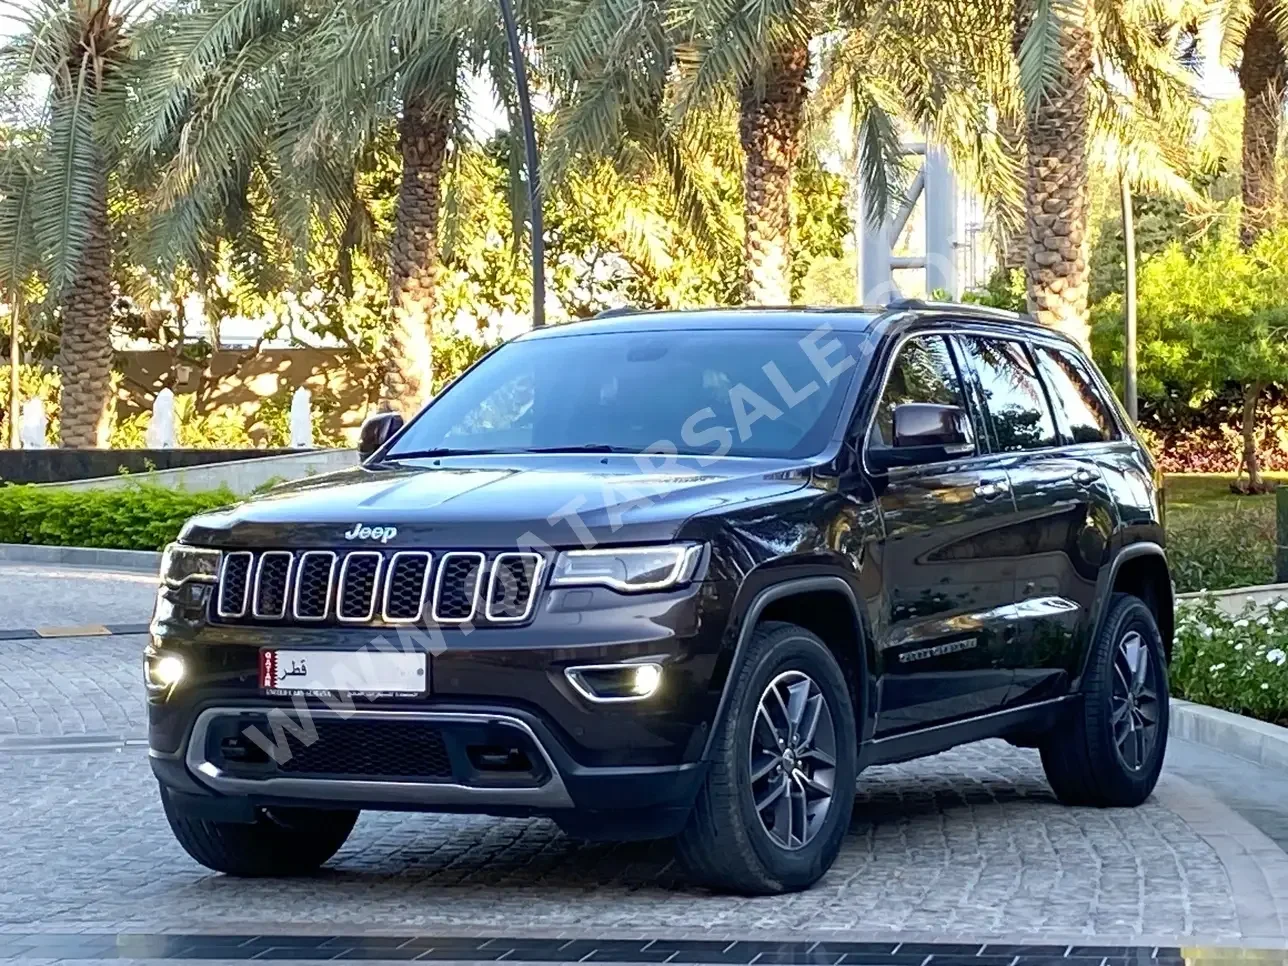 Jeep  Grand Cherokee  Limited  2017  Automatic  151,000 Km  6 Cylinder  Four Wheel Drive (4WD)  SUV  Brown